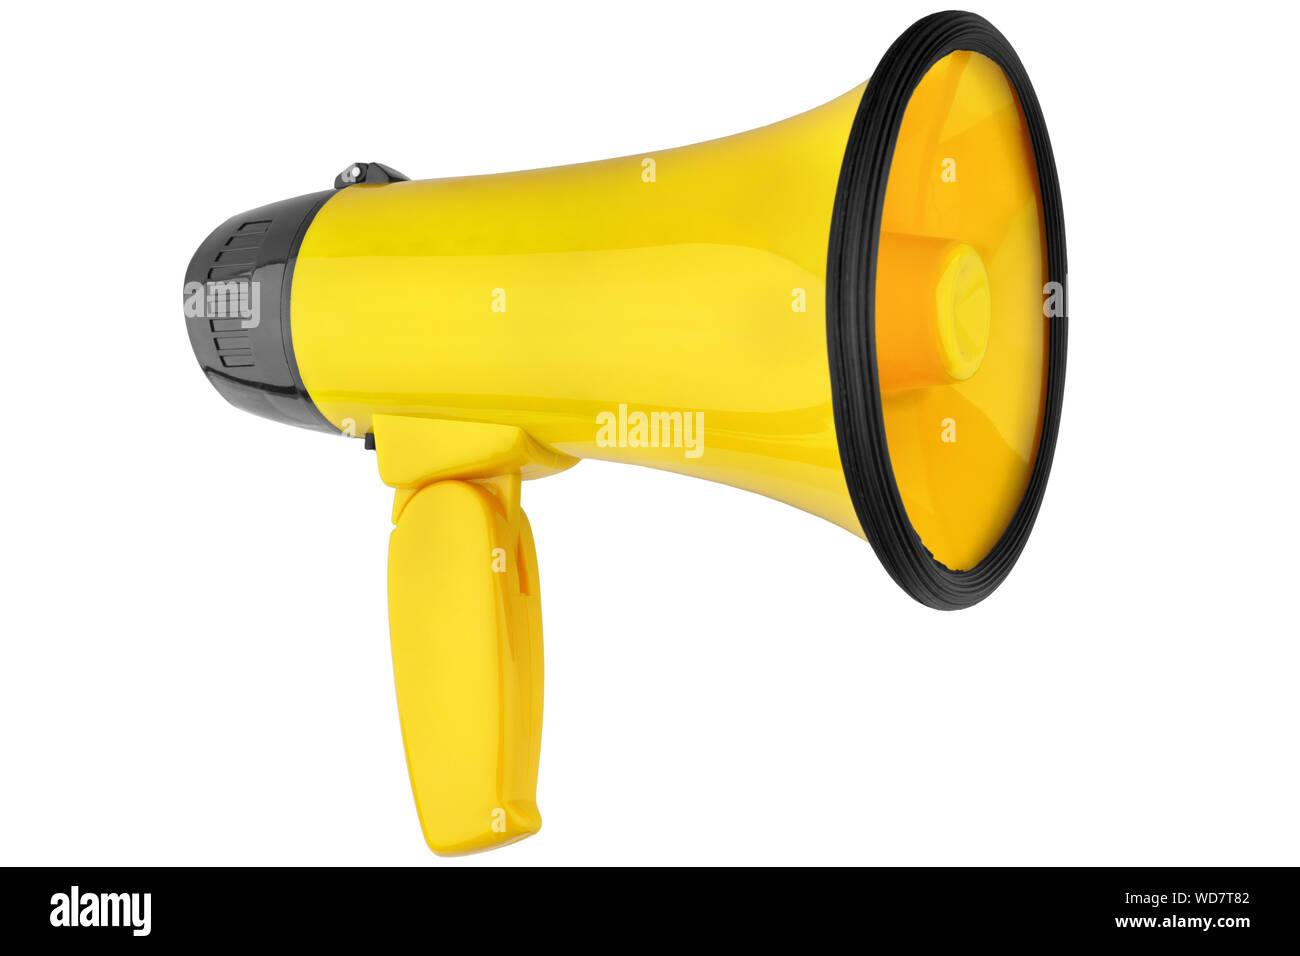 Yellow megaphone on white background isolated close up, hand loudspeaker design, loud-hailer or speaking trumpet, yellow press symbol Stock Photo